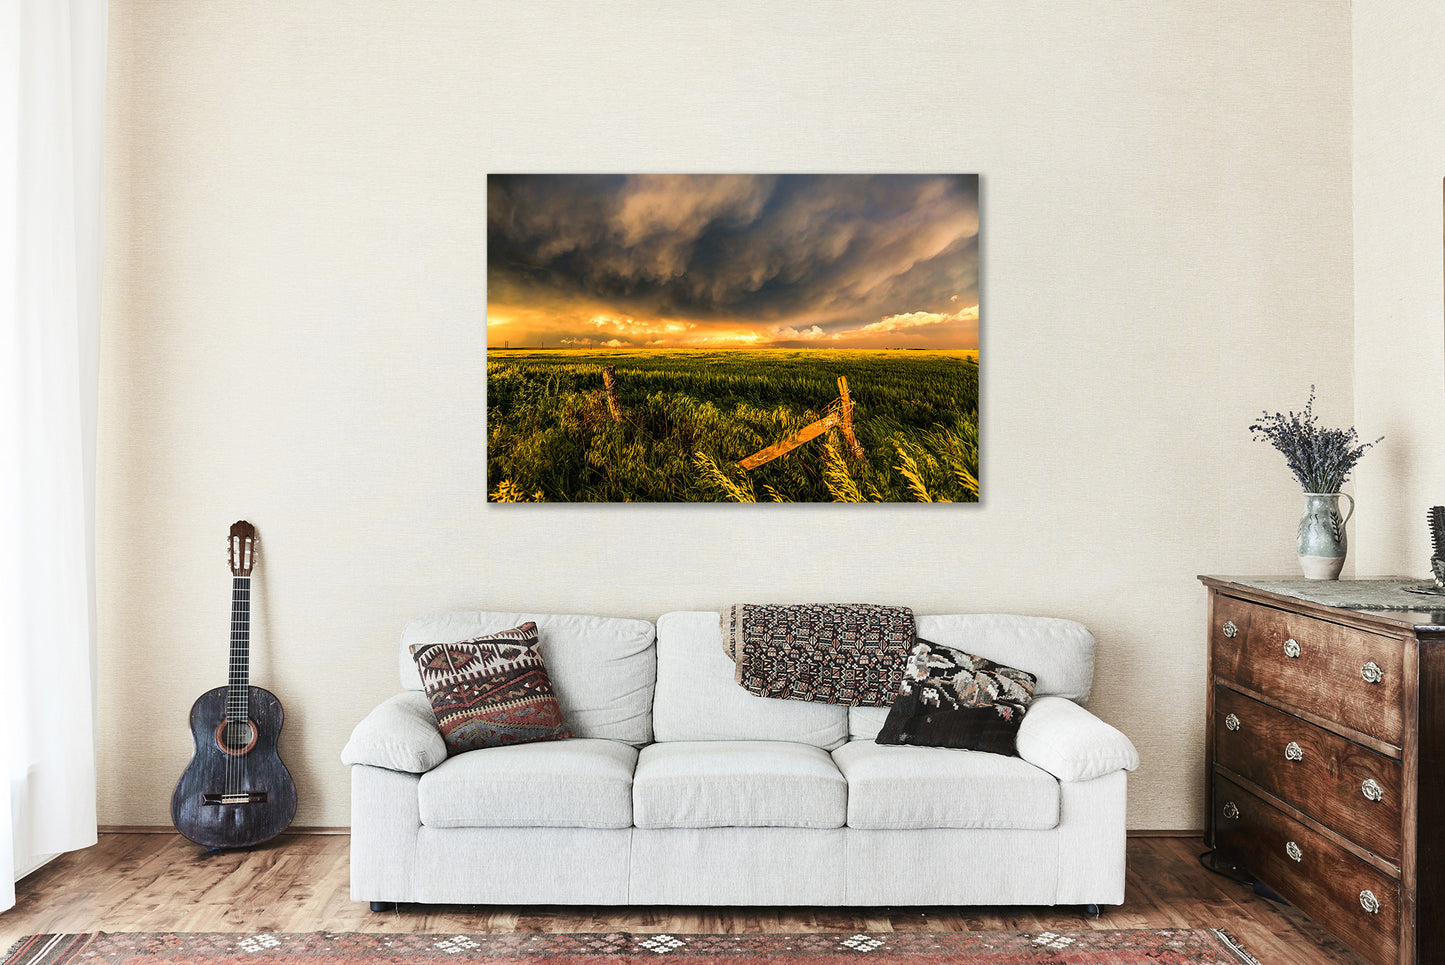 Great Plains Canvas Wall Art - Picture of Stormy Sky Over Fence Posts and Field on Spring Evening in Kansas - Farmhouse Decor Photo Artwork